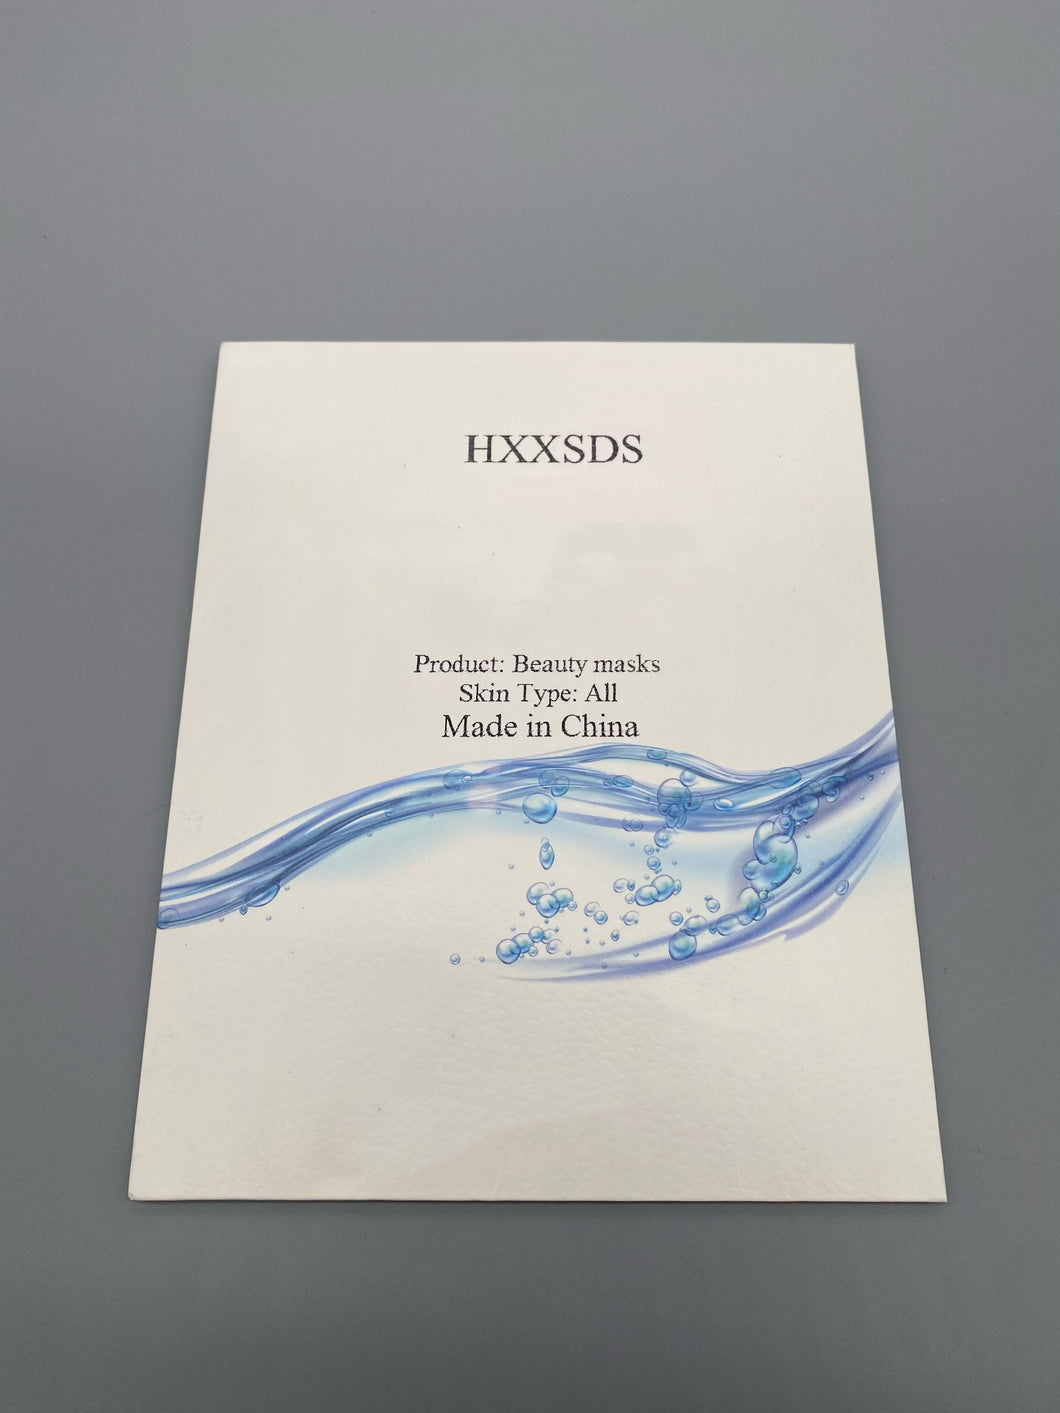 HXXSDS Beauty masks,Sheet mask by HXXSDS Facial Sheet Mask 12 Combo (Pack of 12) - Face Masks Skincare, Hydrating Face Masks, Moisturizing, Brightening and Soothing, Beauty Mask For All Skin Type.